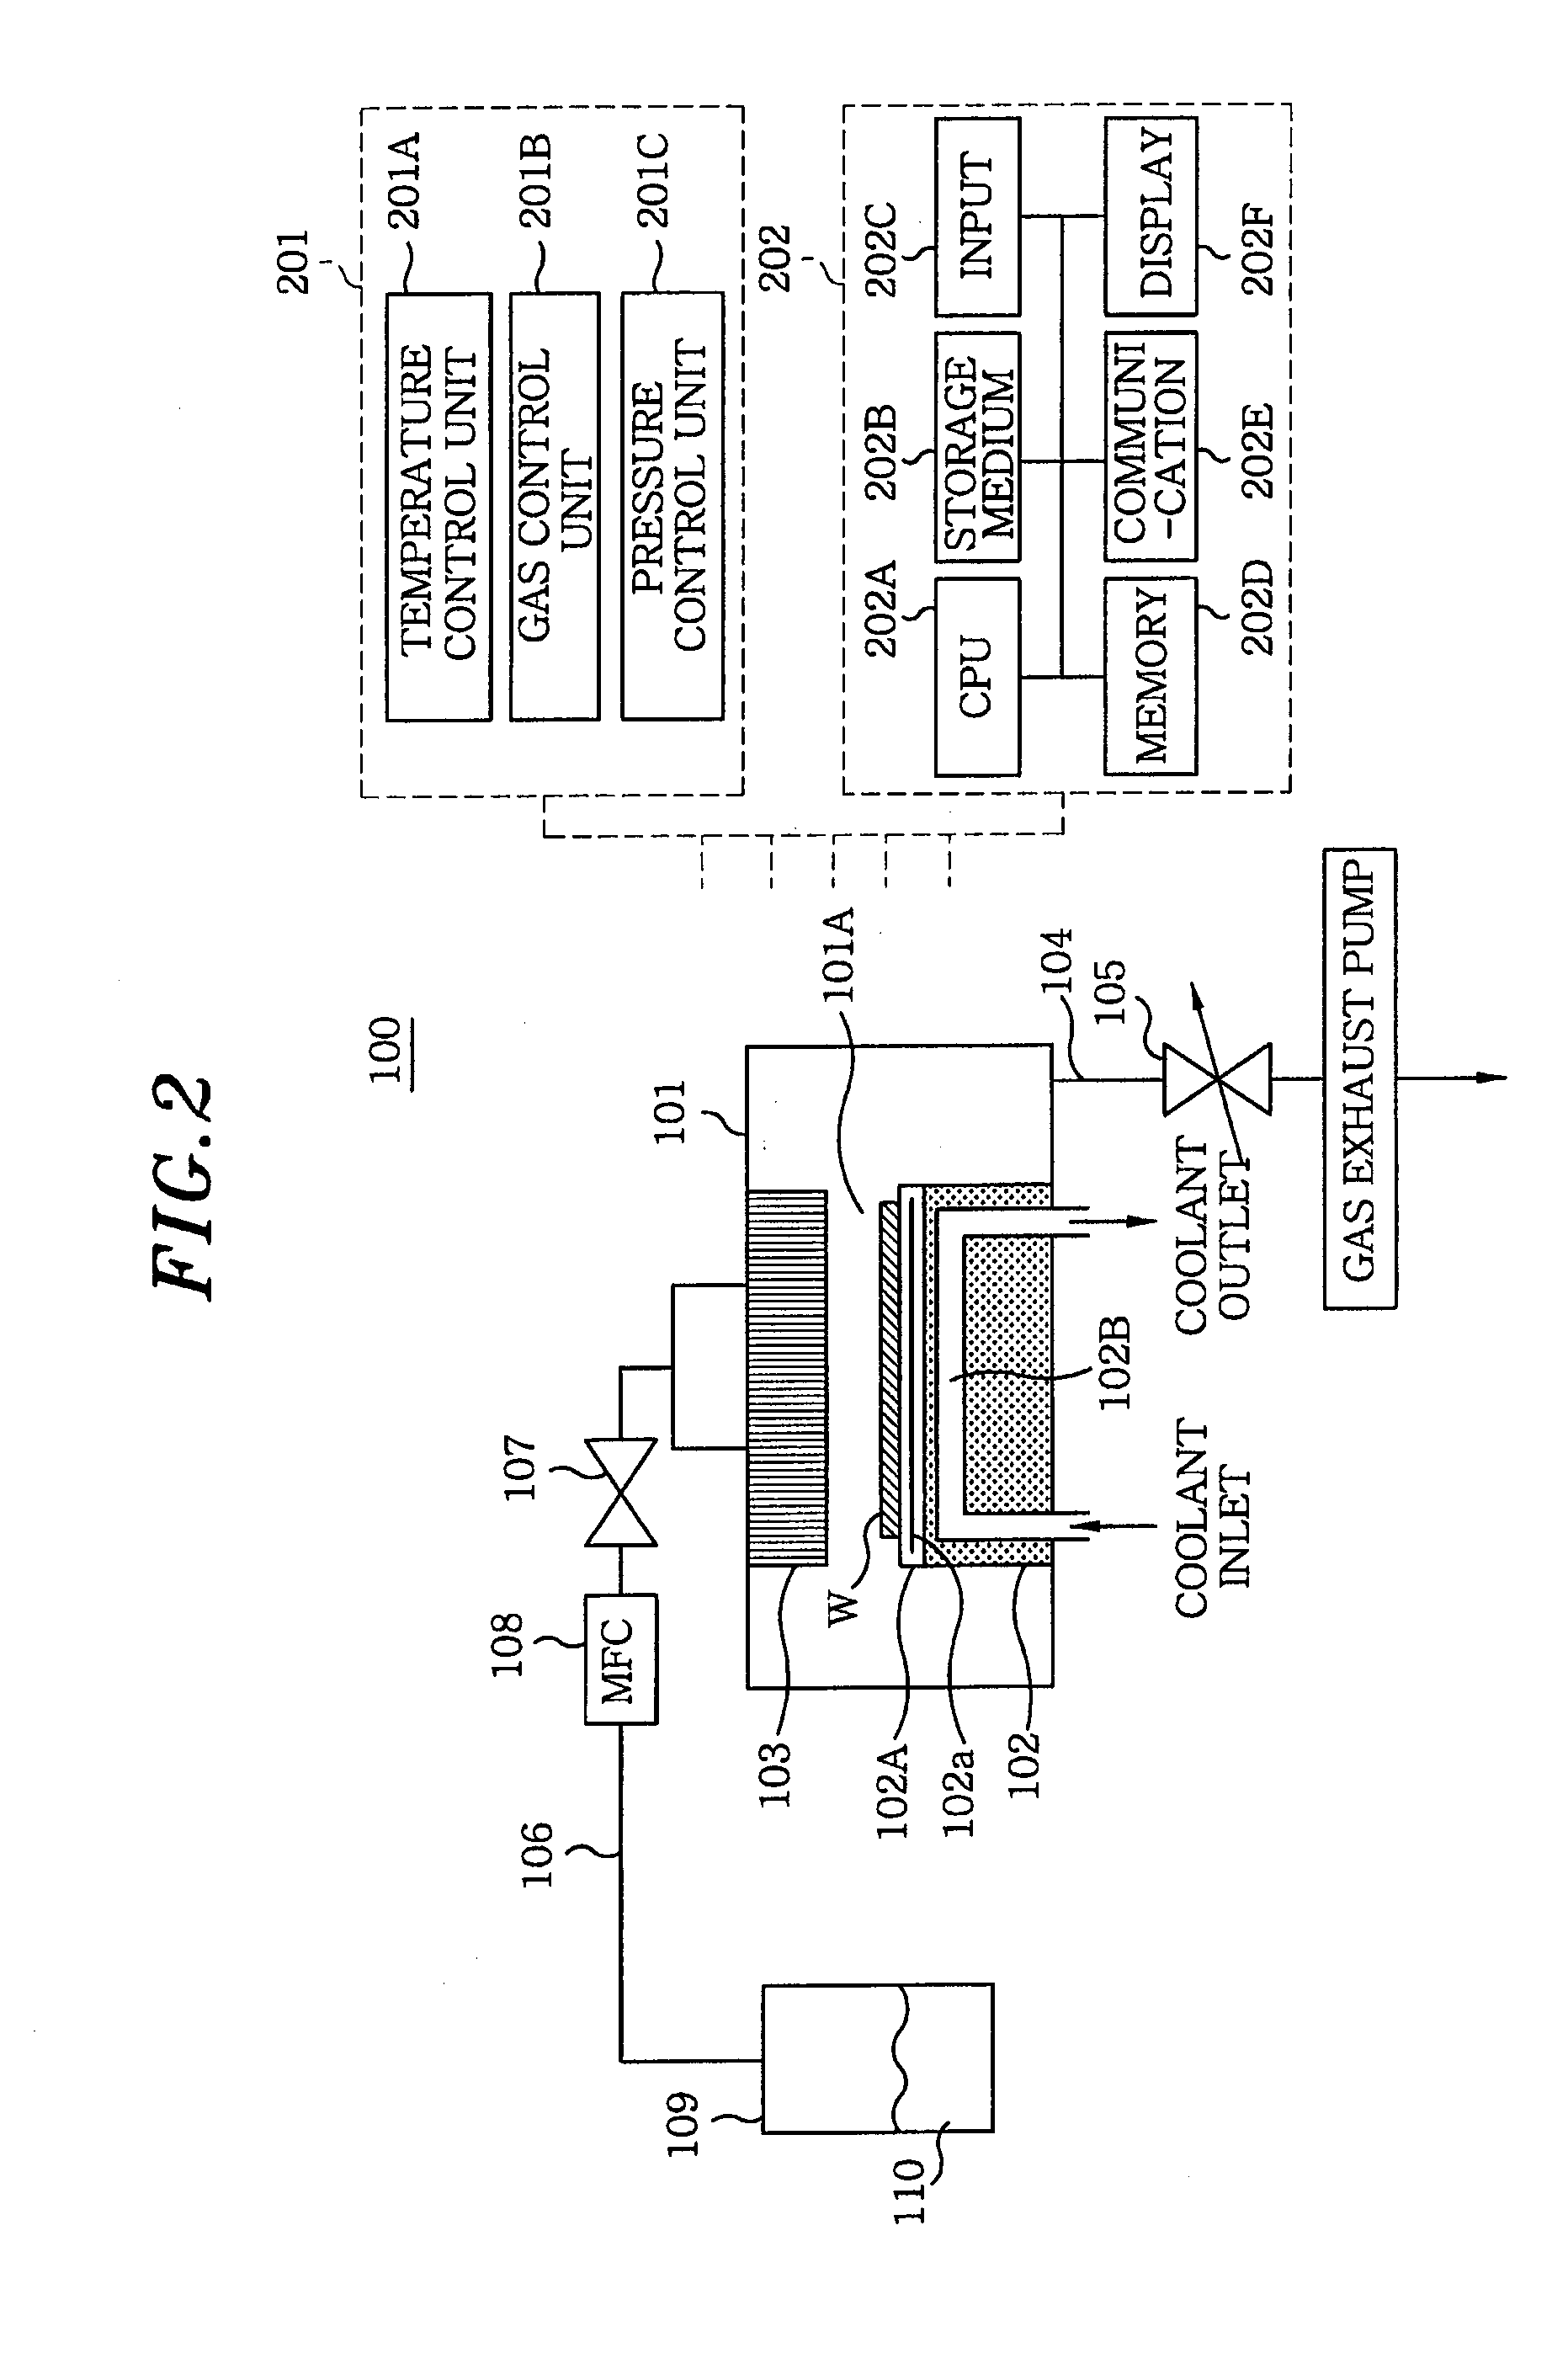 Substrate processing method and apparatus, method for manufacturing semiconductor device and storage medium